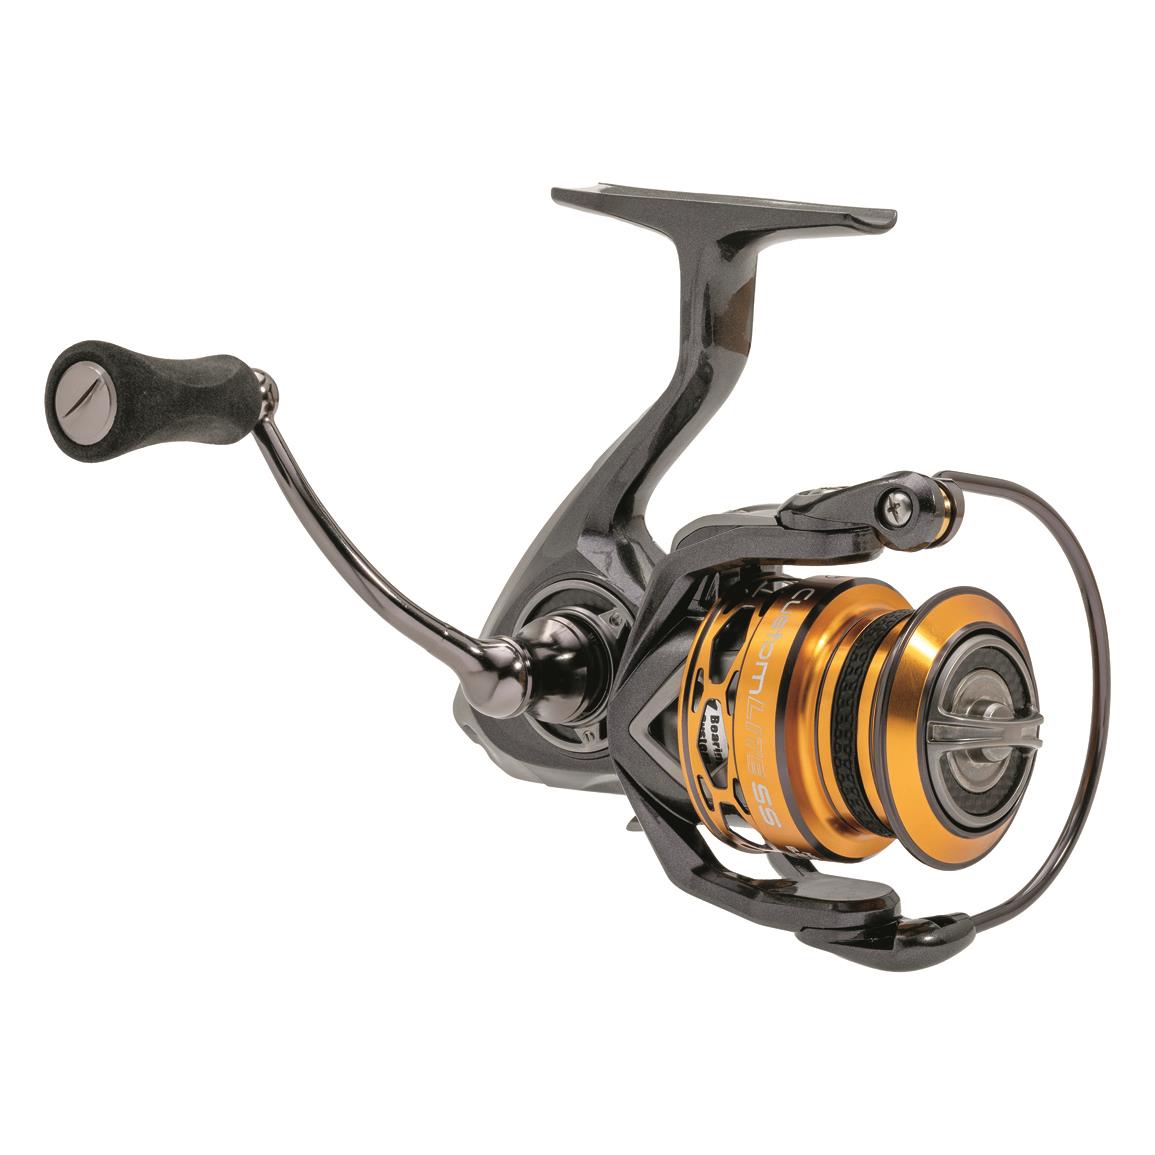 Mr. Crappie Wally Marshall Pro Target Spinning Reel, 5.2:1 Gear Ratio